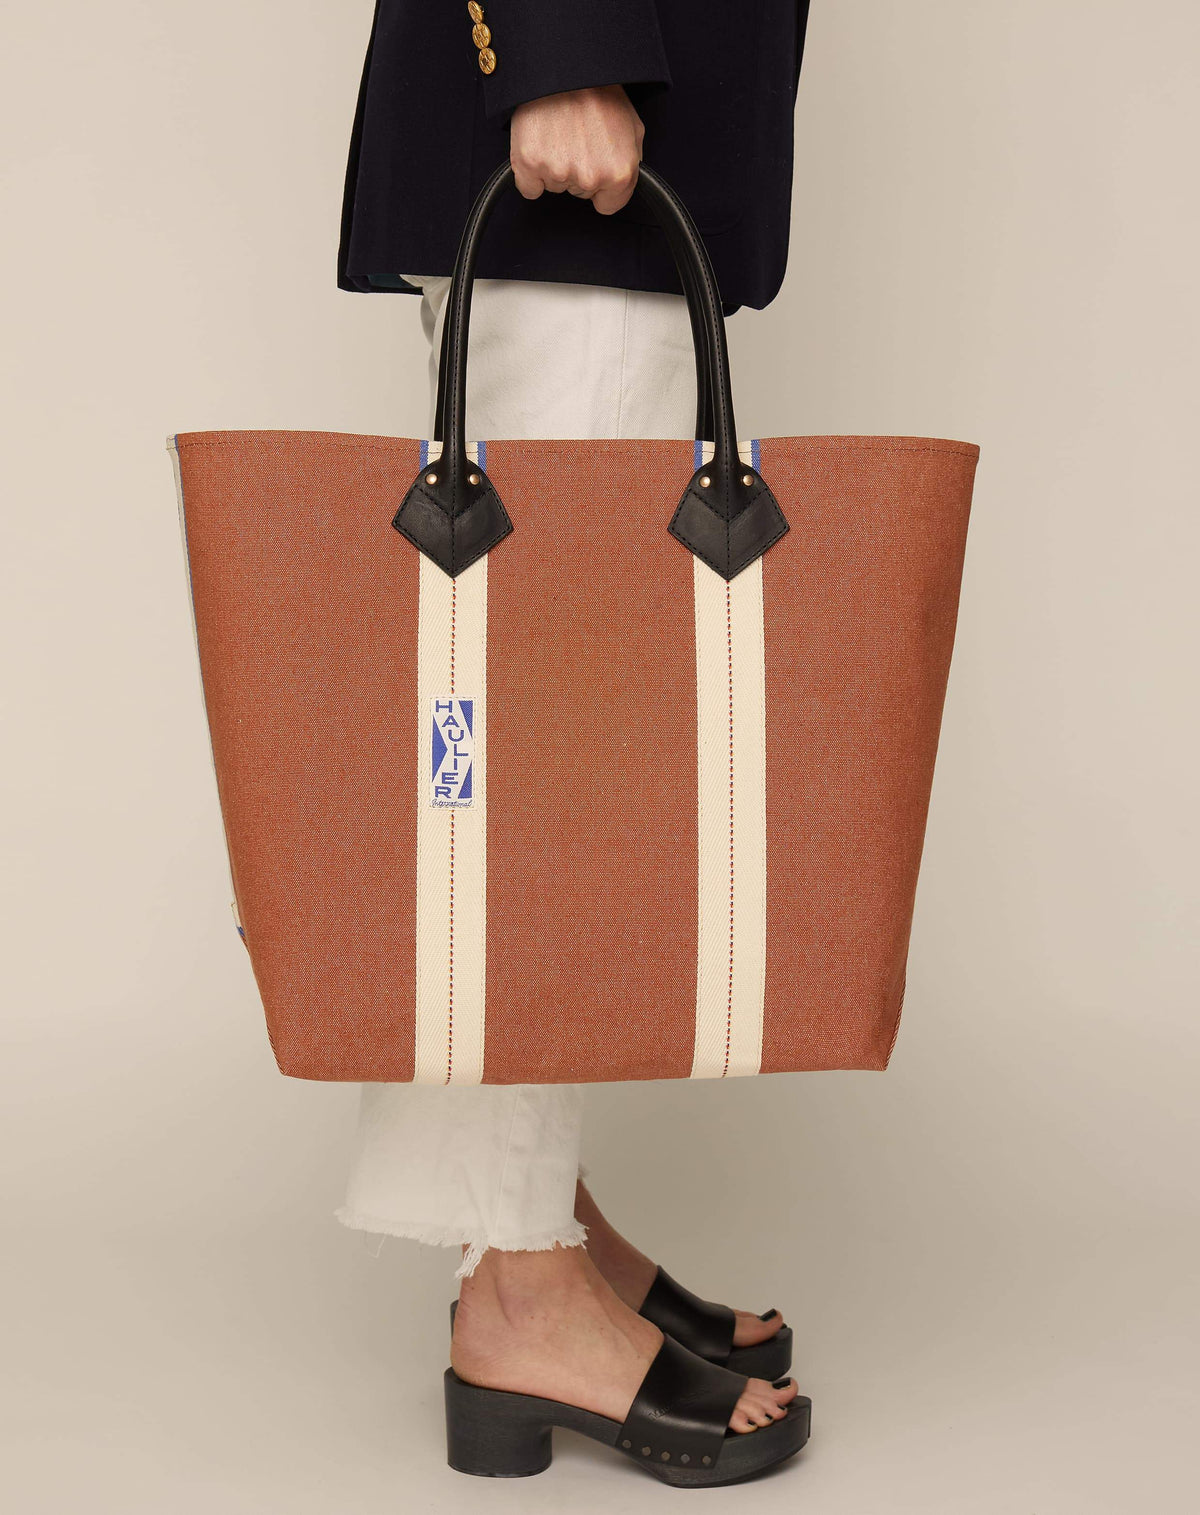 Image of person in white trousers and black slides holding medium-sized classic canvas tote bag in tan colour with black leather handles and contrasting stripes.